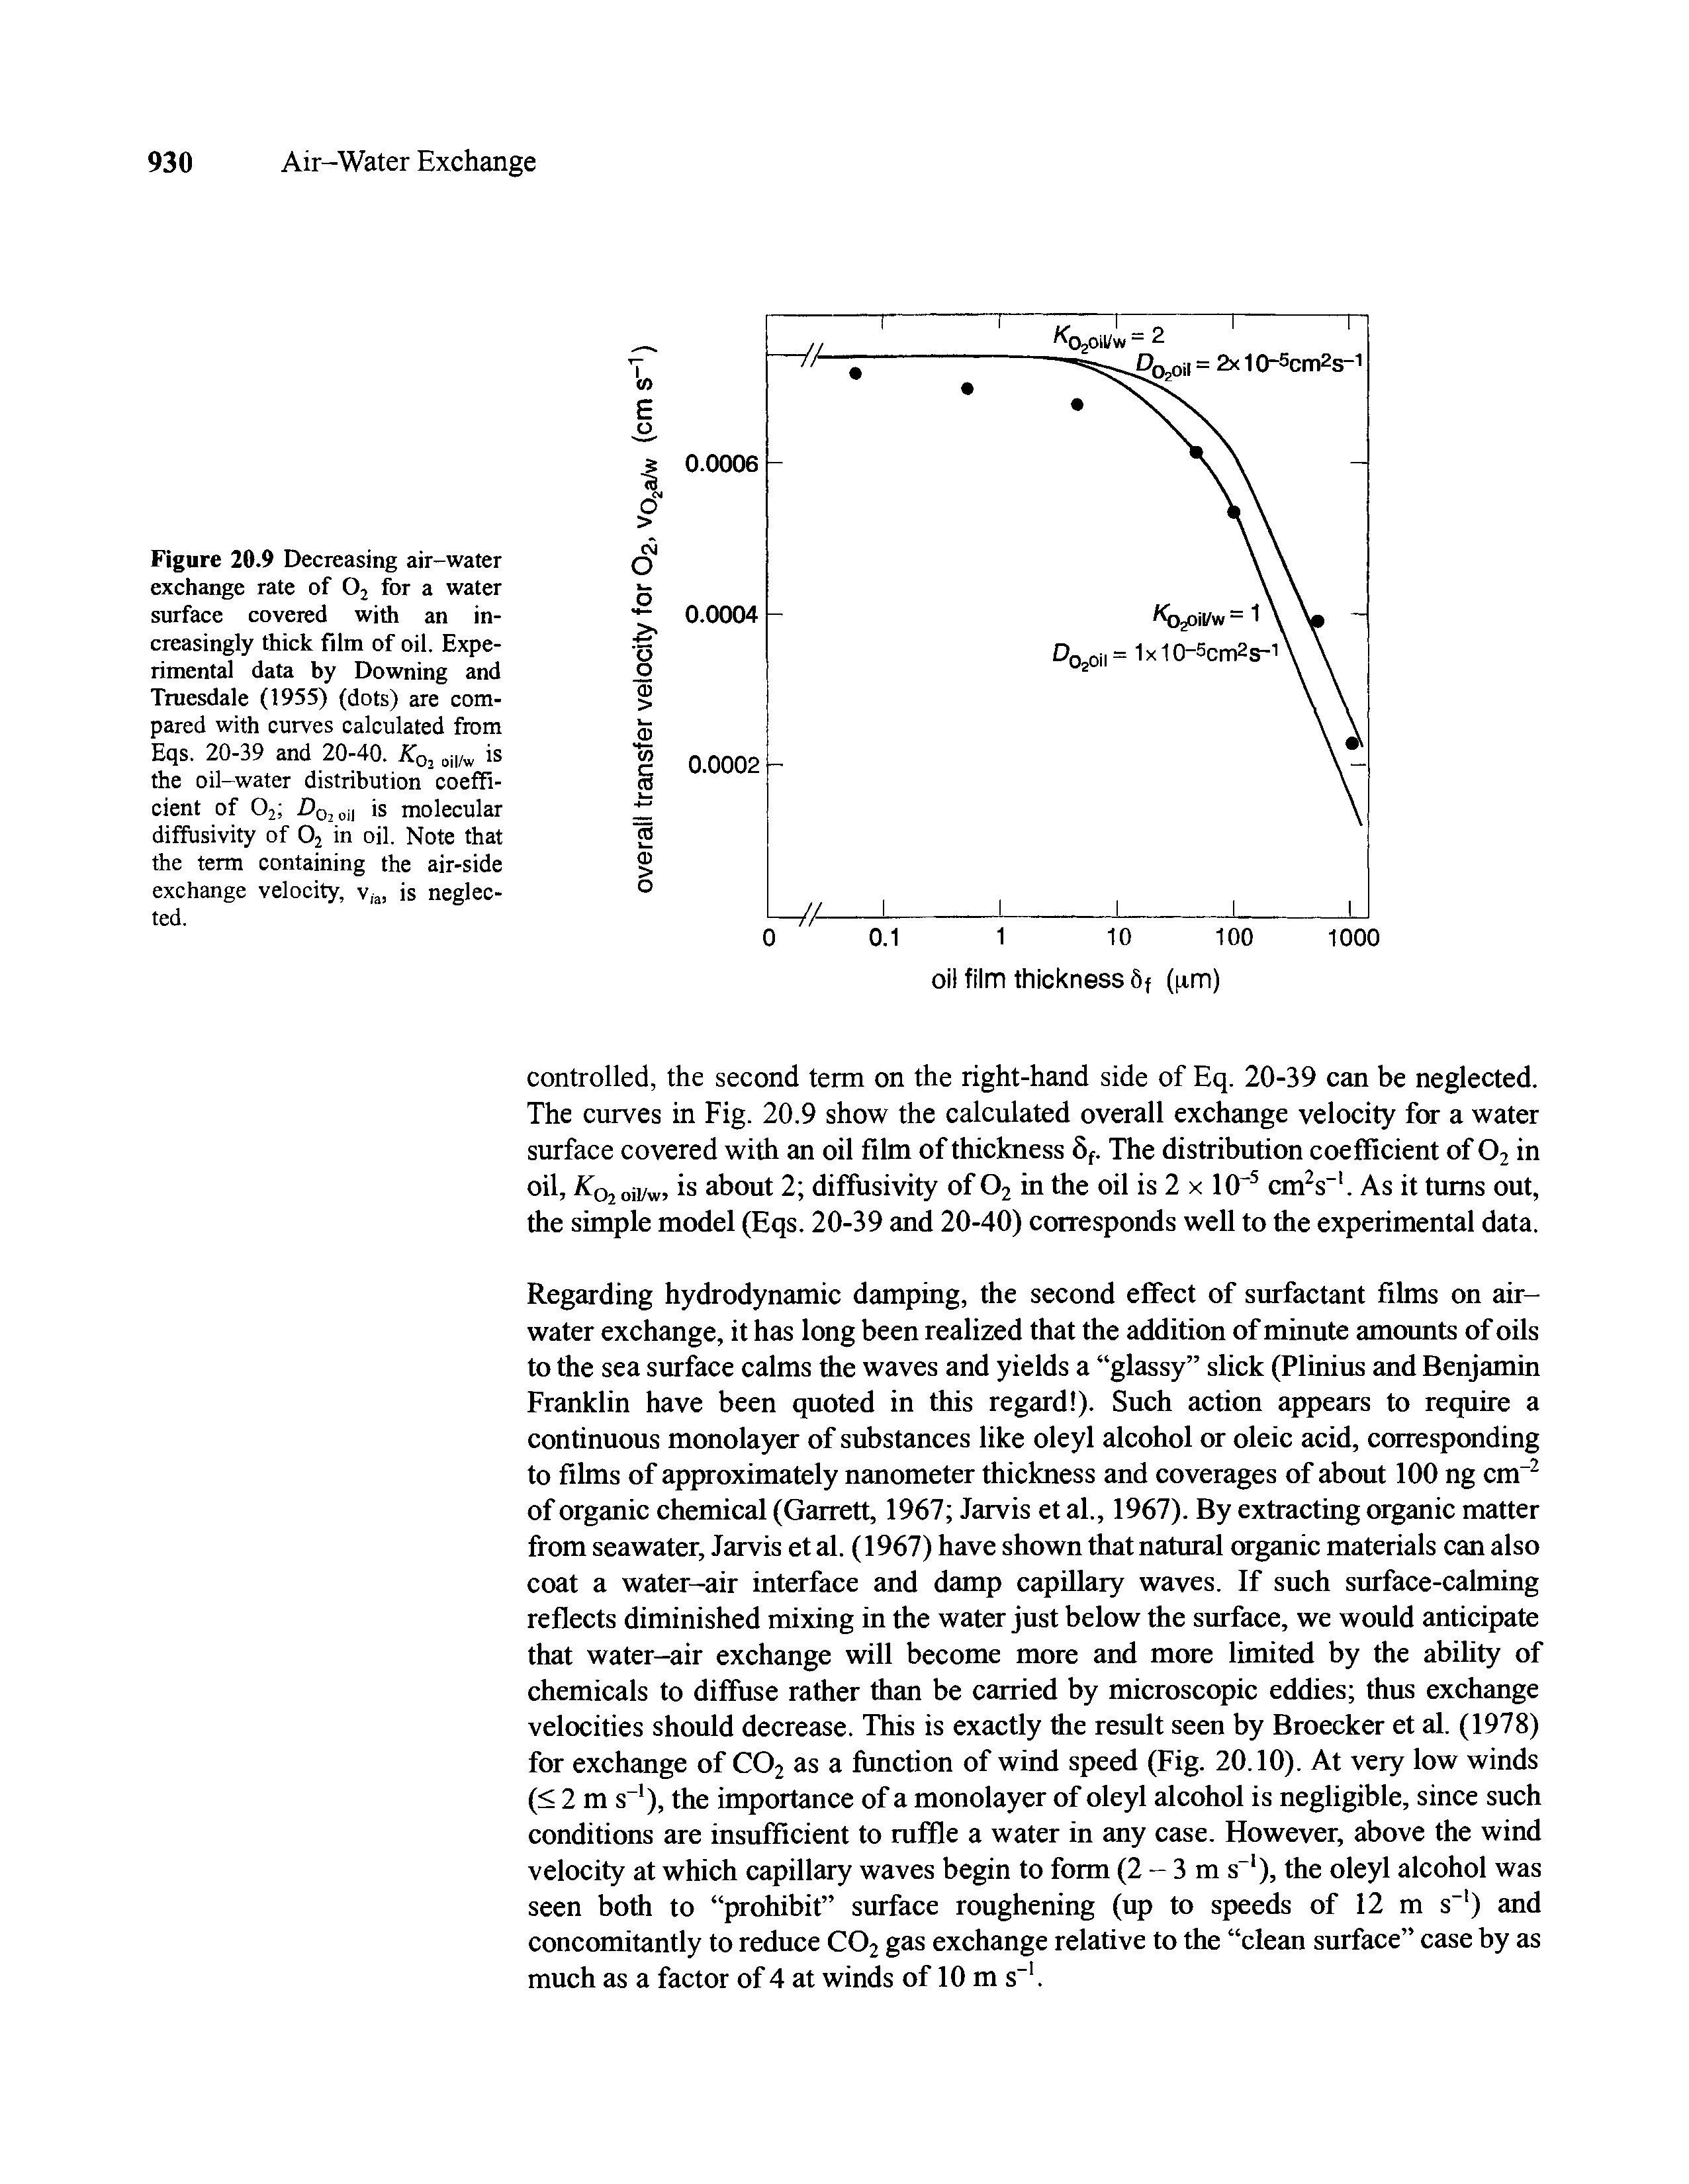 Figure 20.9 Decreasing air-water exchange rate of 02 for a water surface covered with an increasingly thick film of oil. Experimental data by Downing and Truesdale (1955) (dots) are compared with curves calculated from Eqs. 20-39 and 20-40. K0l oM/w is the oil-water distribution coefficient of 02 D0l oi, is molecular diffusivity of 02 in oil. Note that the term containing the air-side exchange velocity, v,a, is neglected.